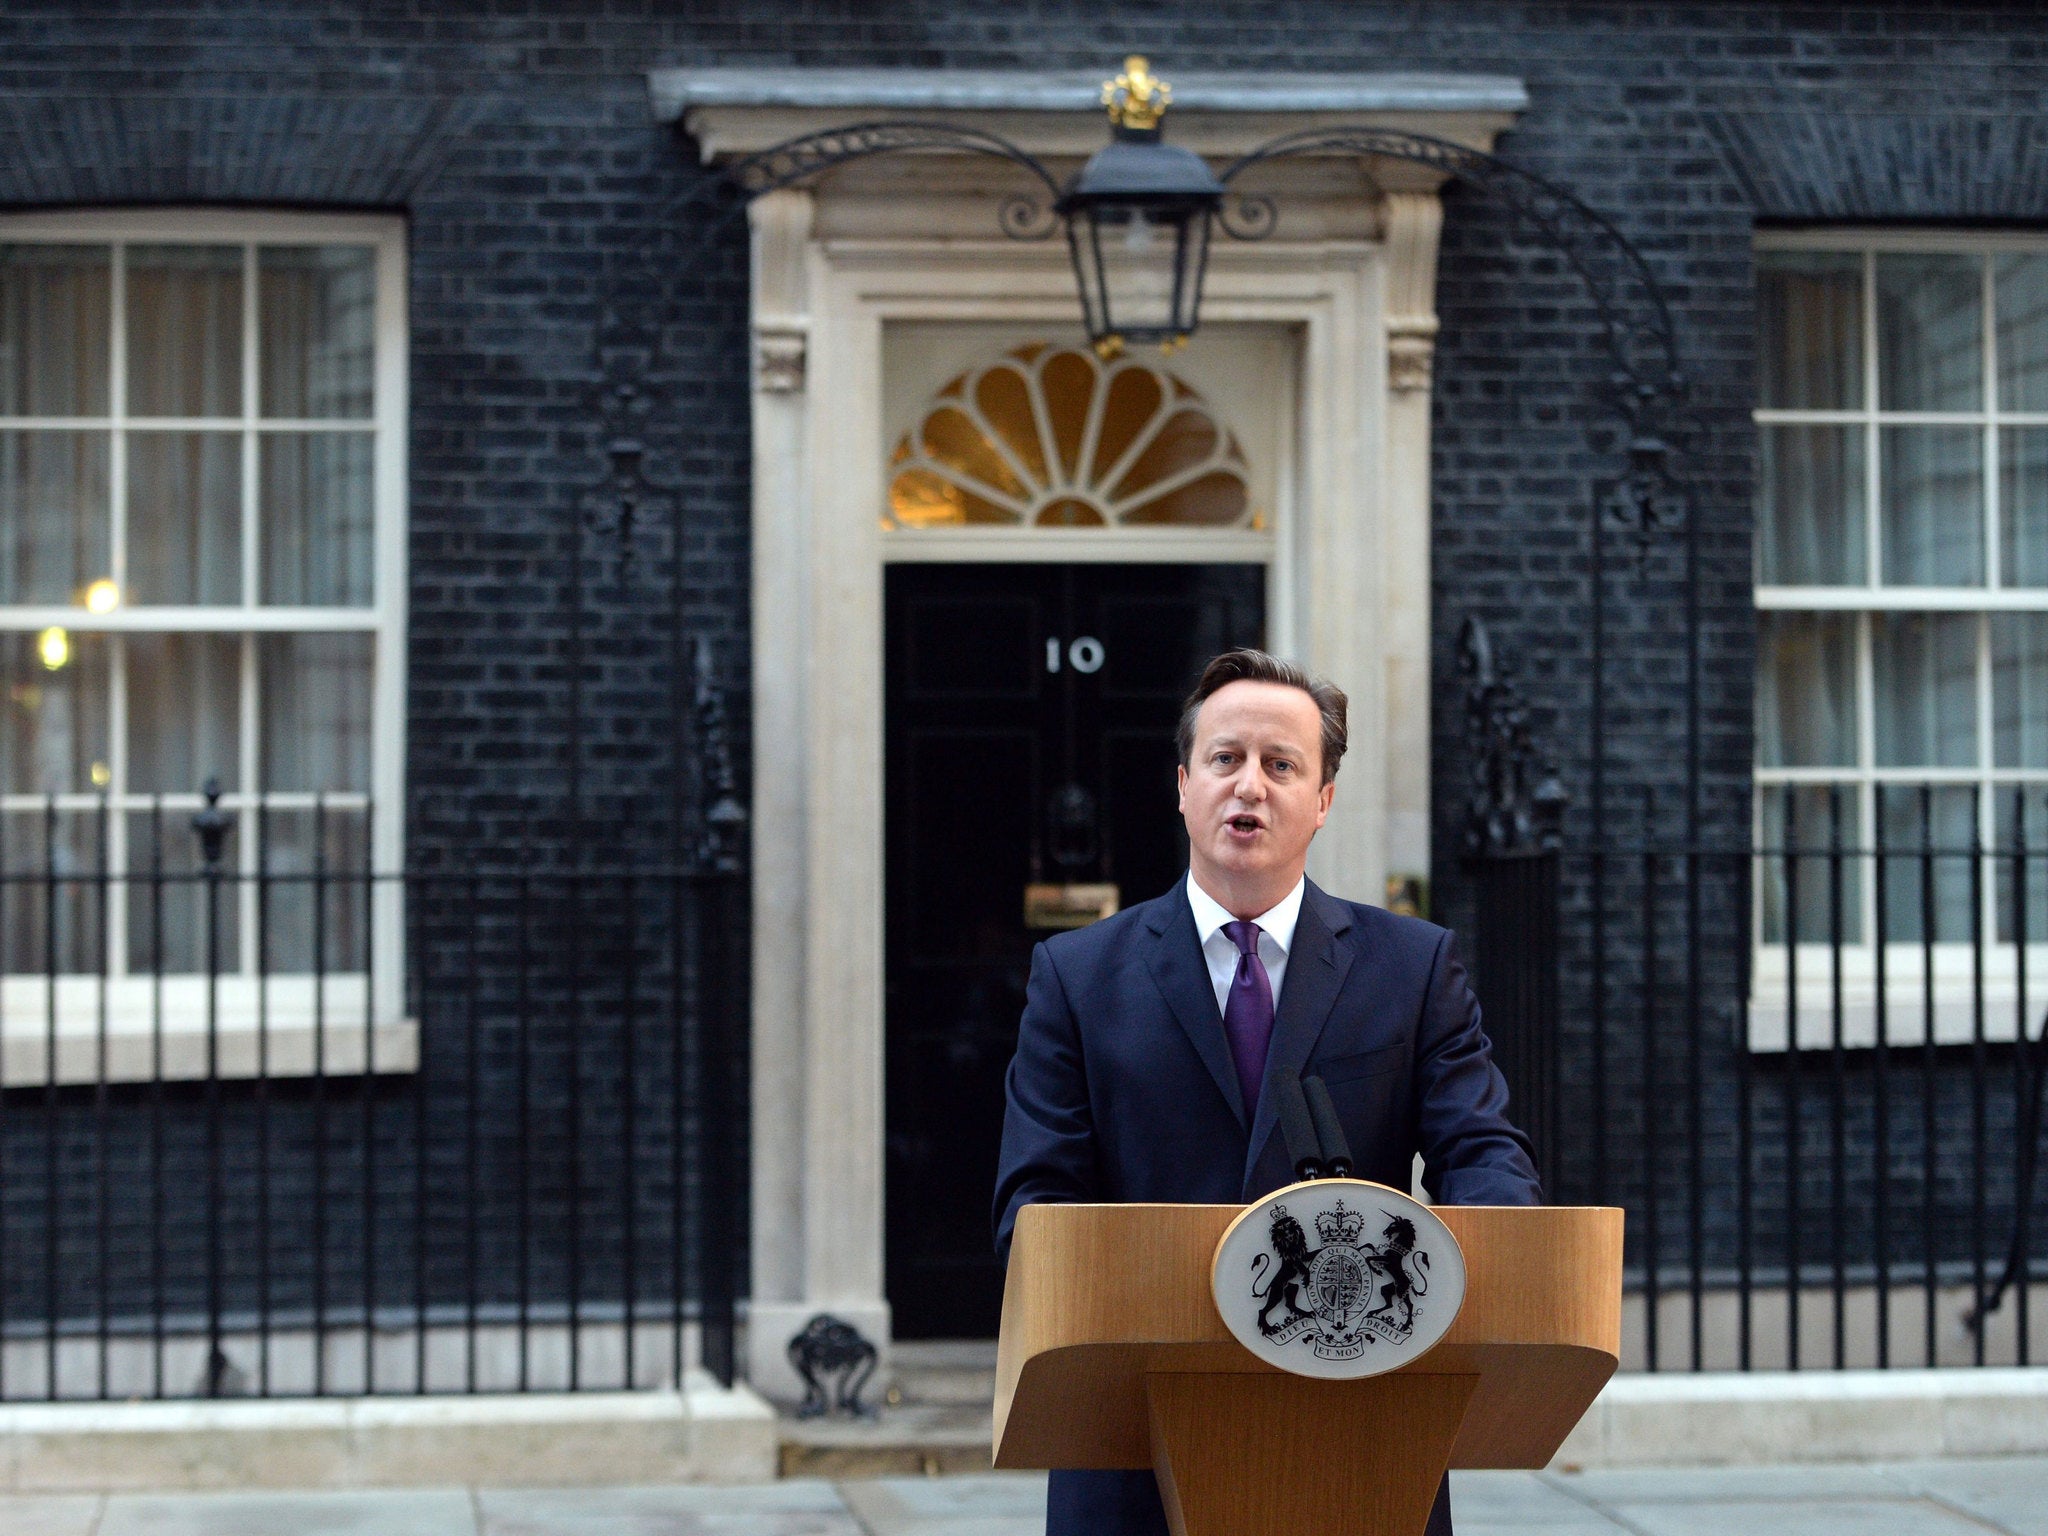 The Prime Minister David Cameron speaks outside Downing Street after the result of the Scottish Referendum